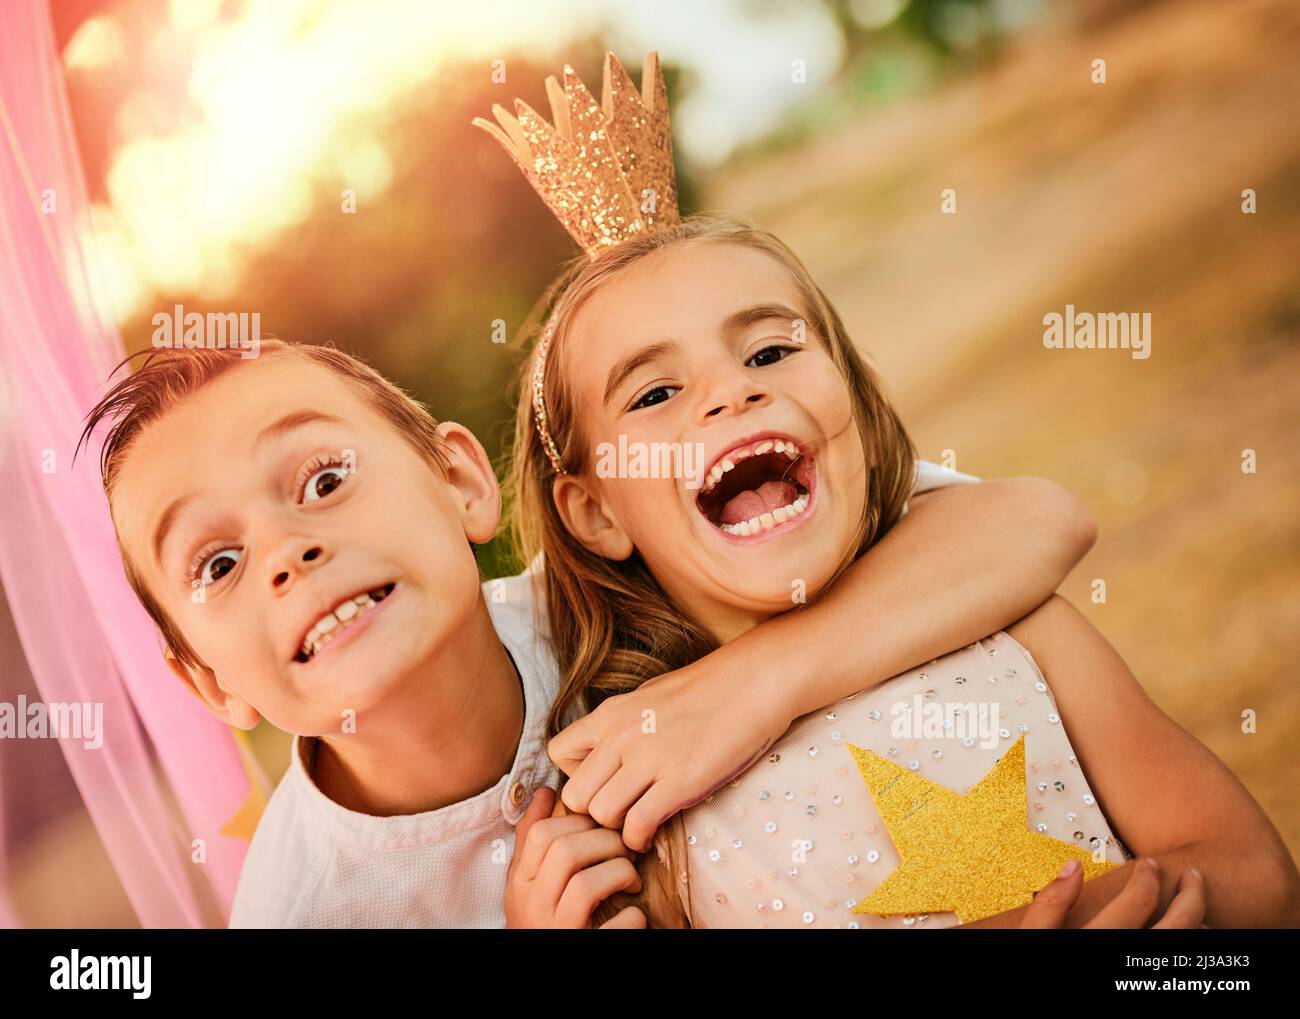 Enjoyment is spending time with your sibling. Shot of an adorable little brother and sister playing outdoors. Stock Photo